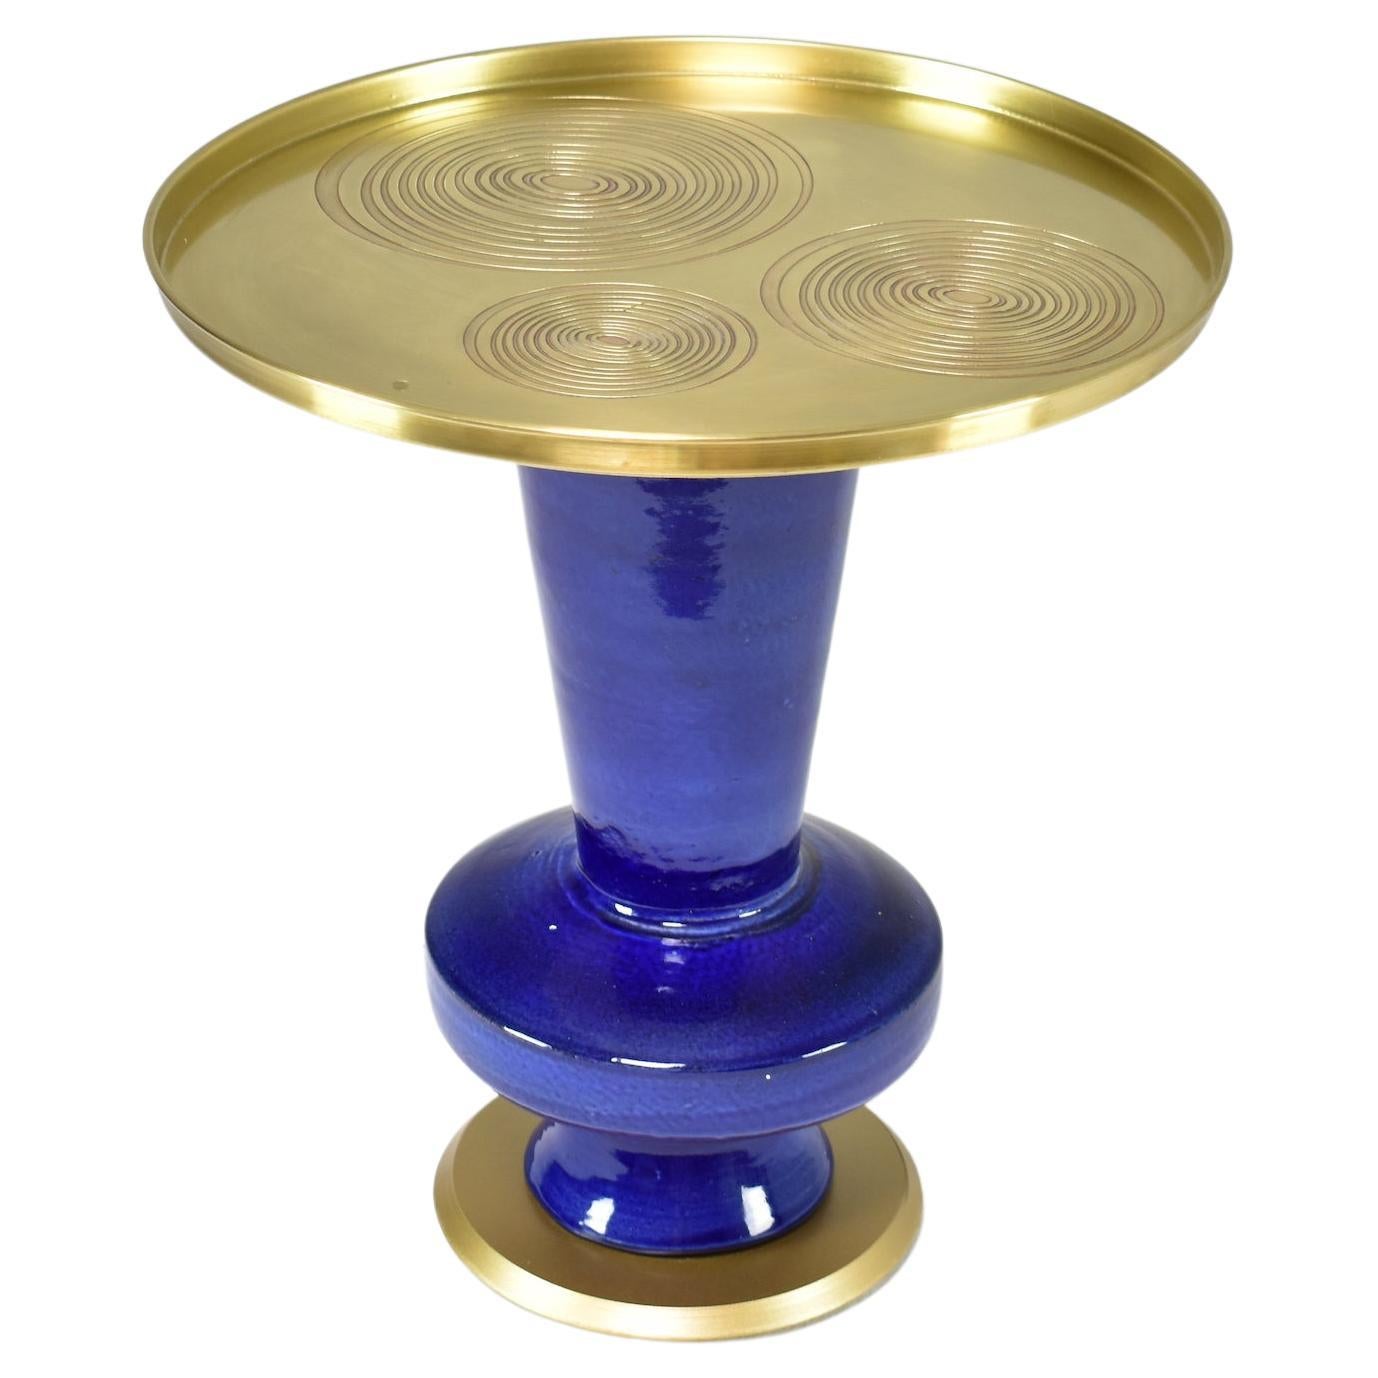  Contemporary Brass and Ceramic Side Table by JAS  For Sale